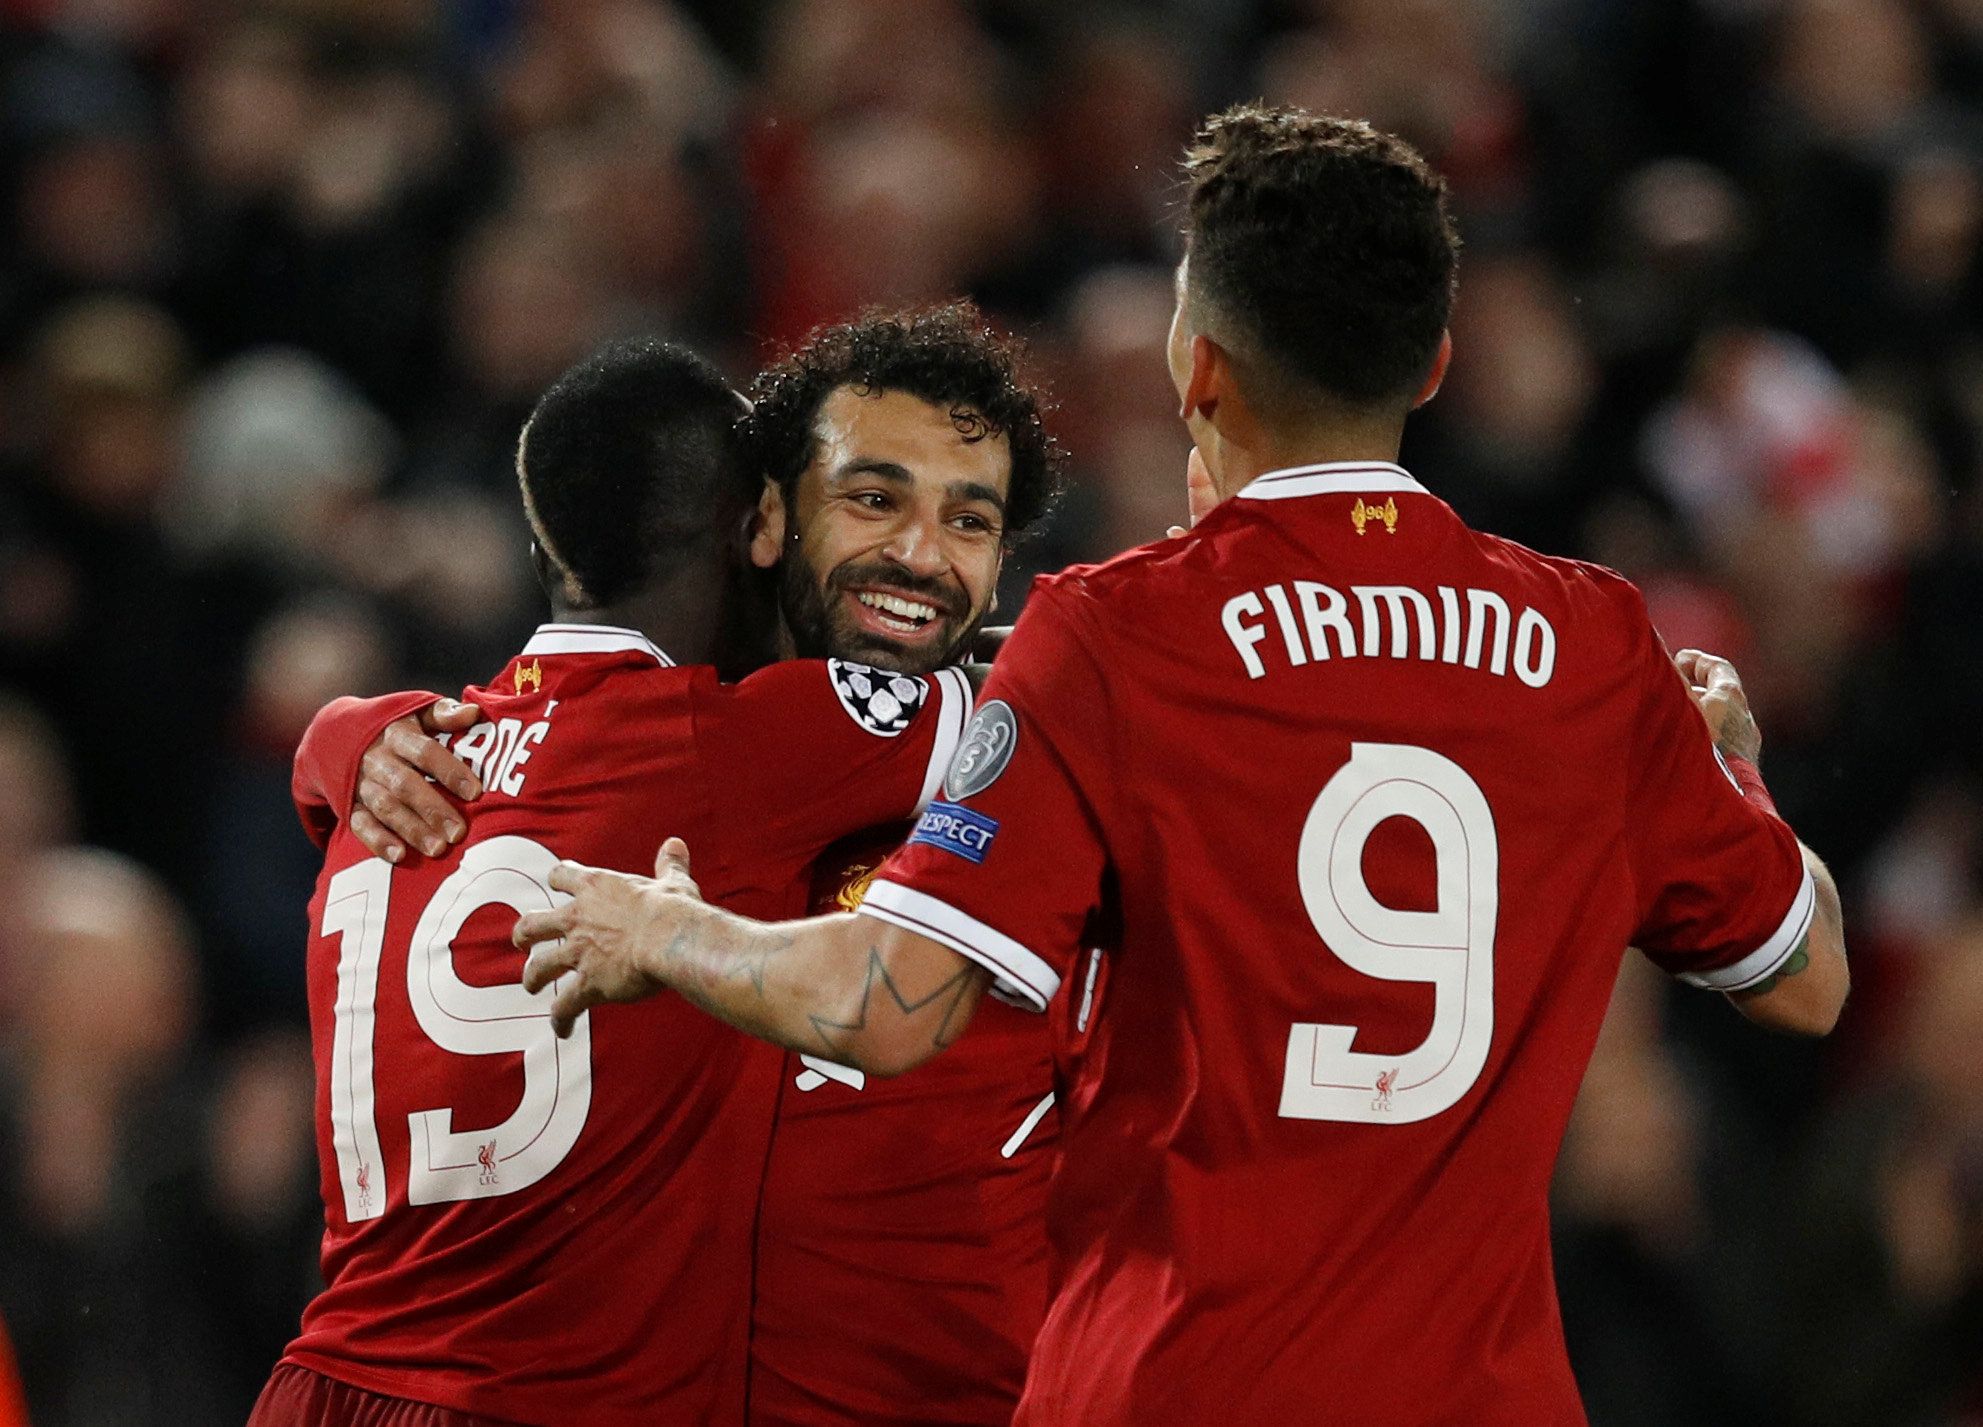 Soccer Football - Champions League Semi Final First Leg - Liverpool vs AS Roma - Anfield, Liverpool, Britain - April 24, 2018   Liverpool's Sadio Mane celebrates scoring their third goal with Mohamed Salah and Roberto Firmino    REUTERS/Phil Noble